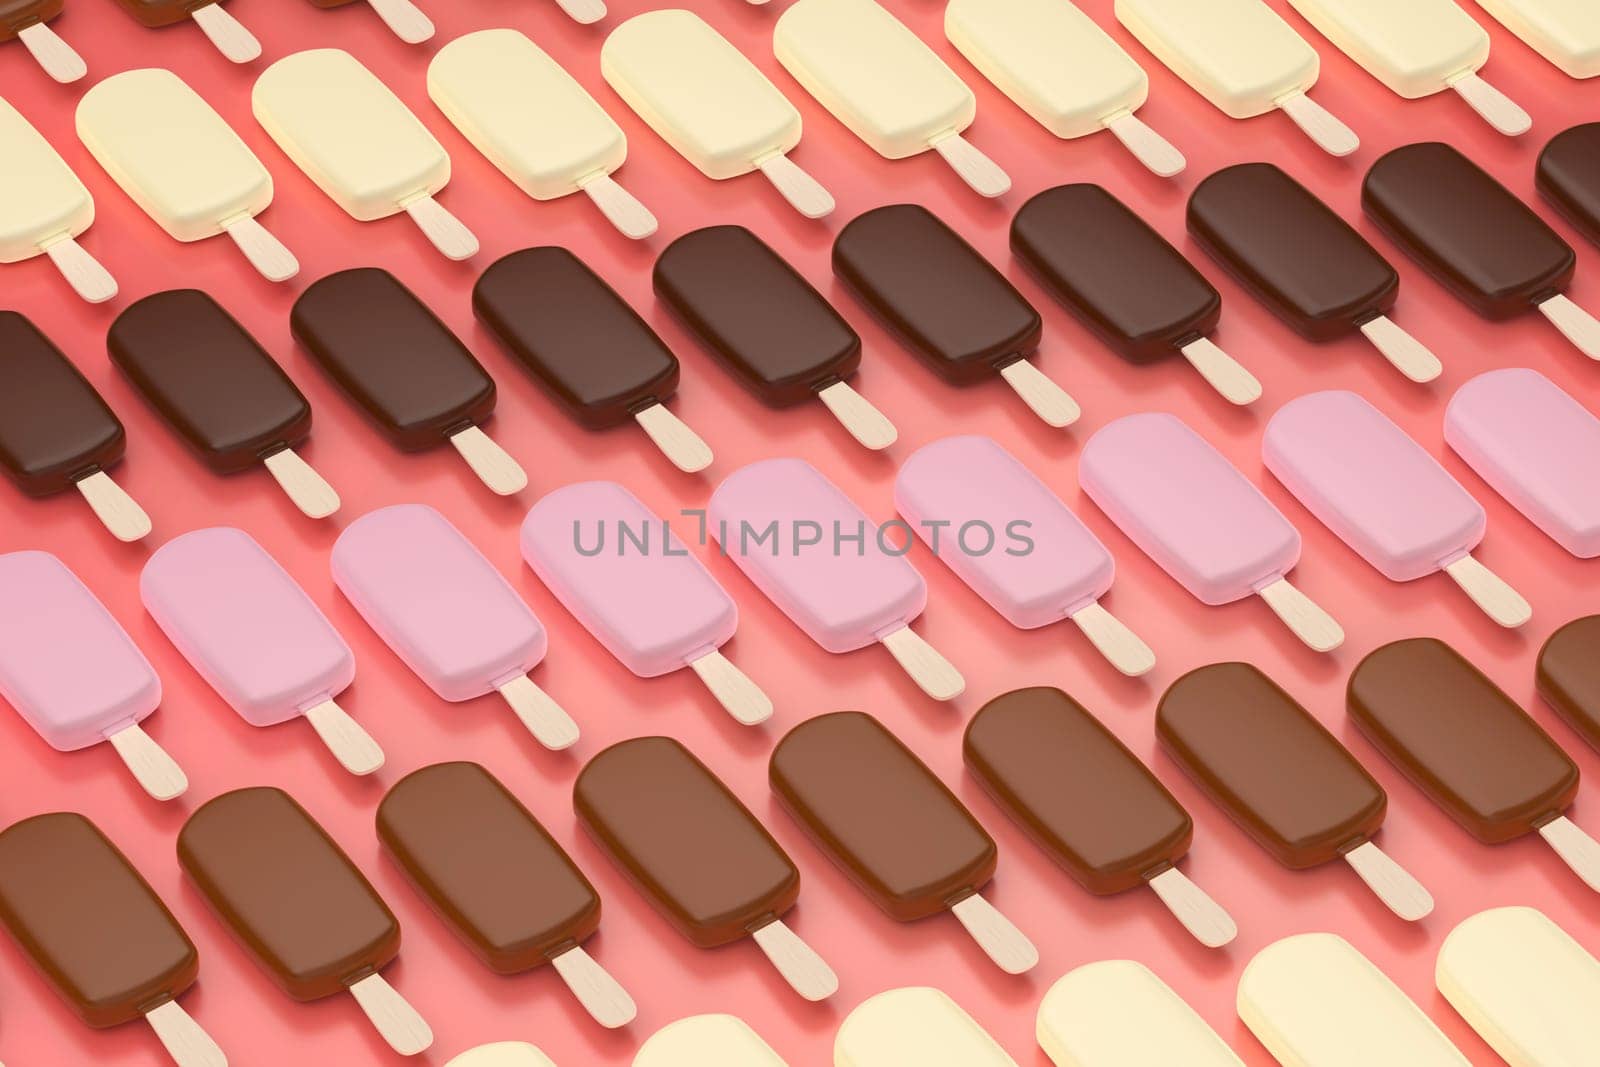 Many rows with different chocolate ice creams